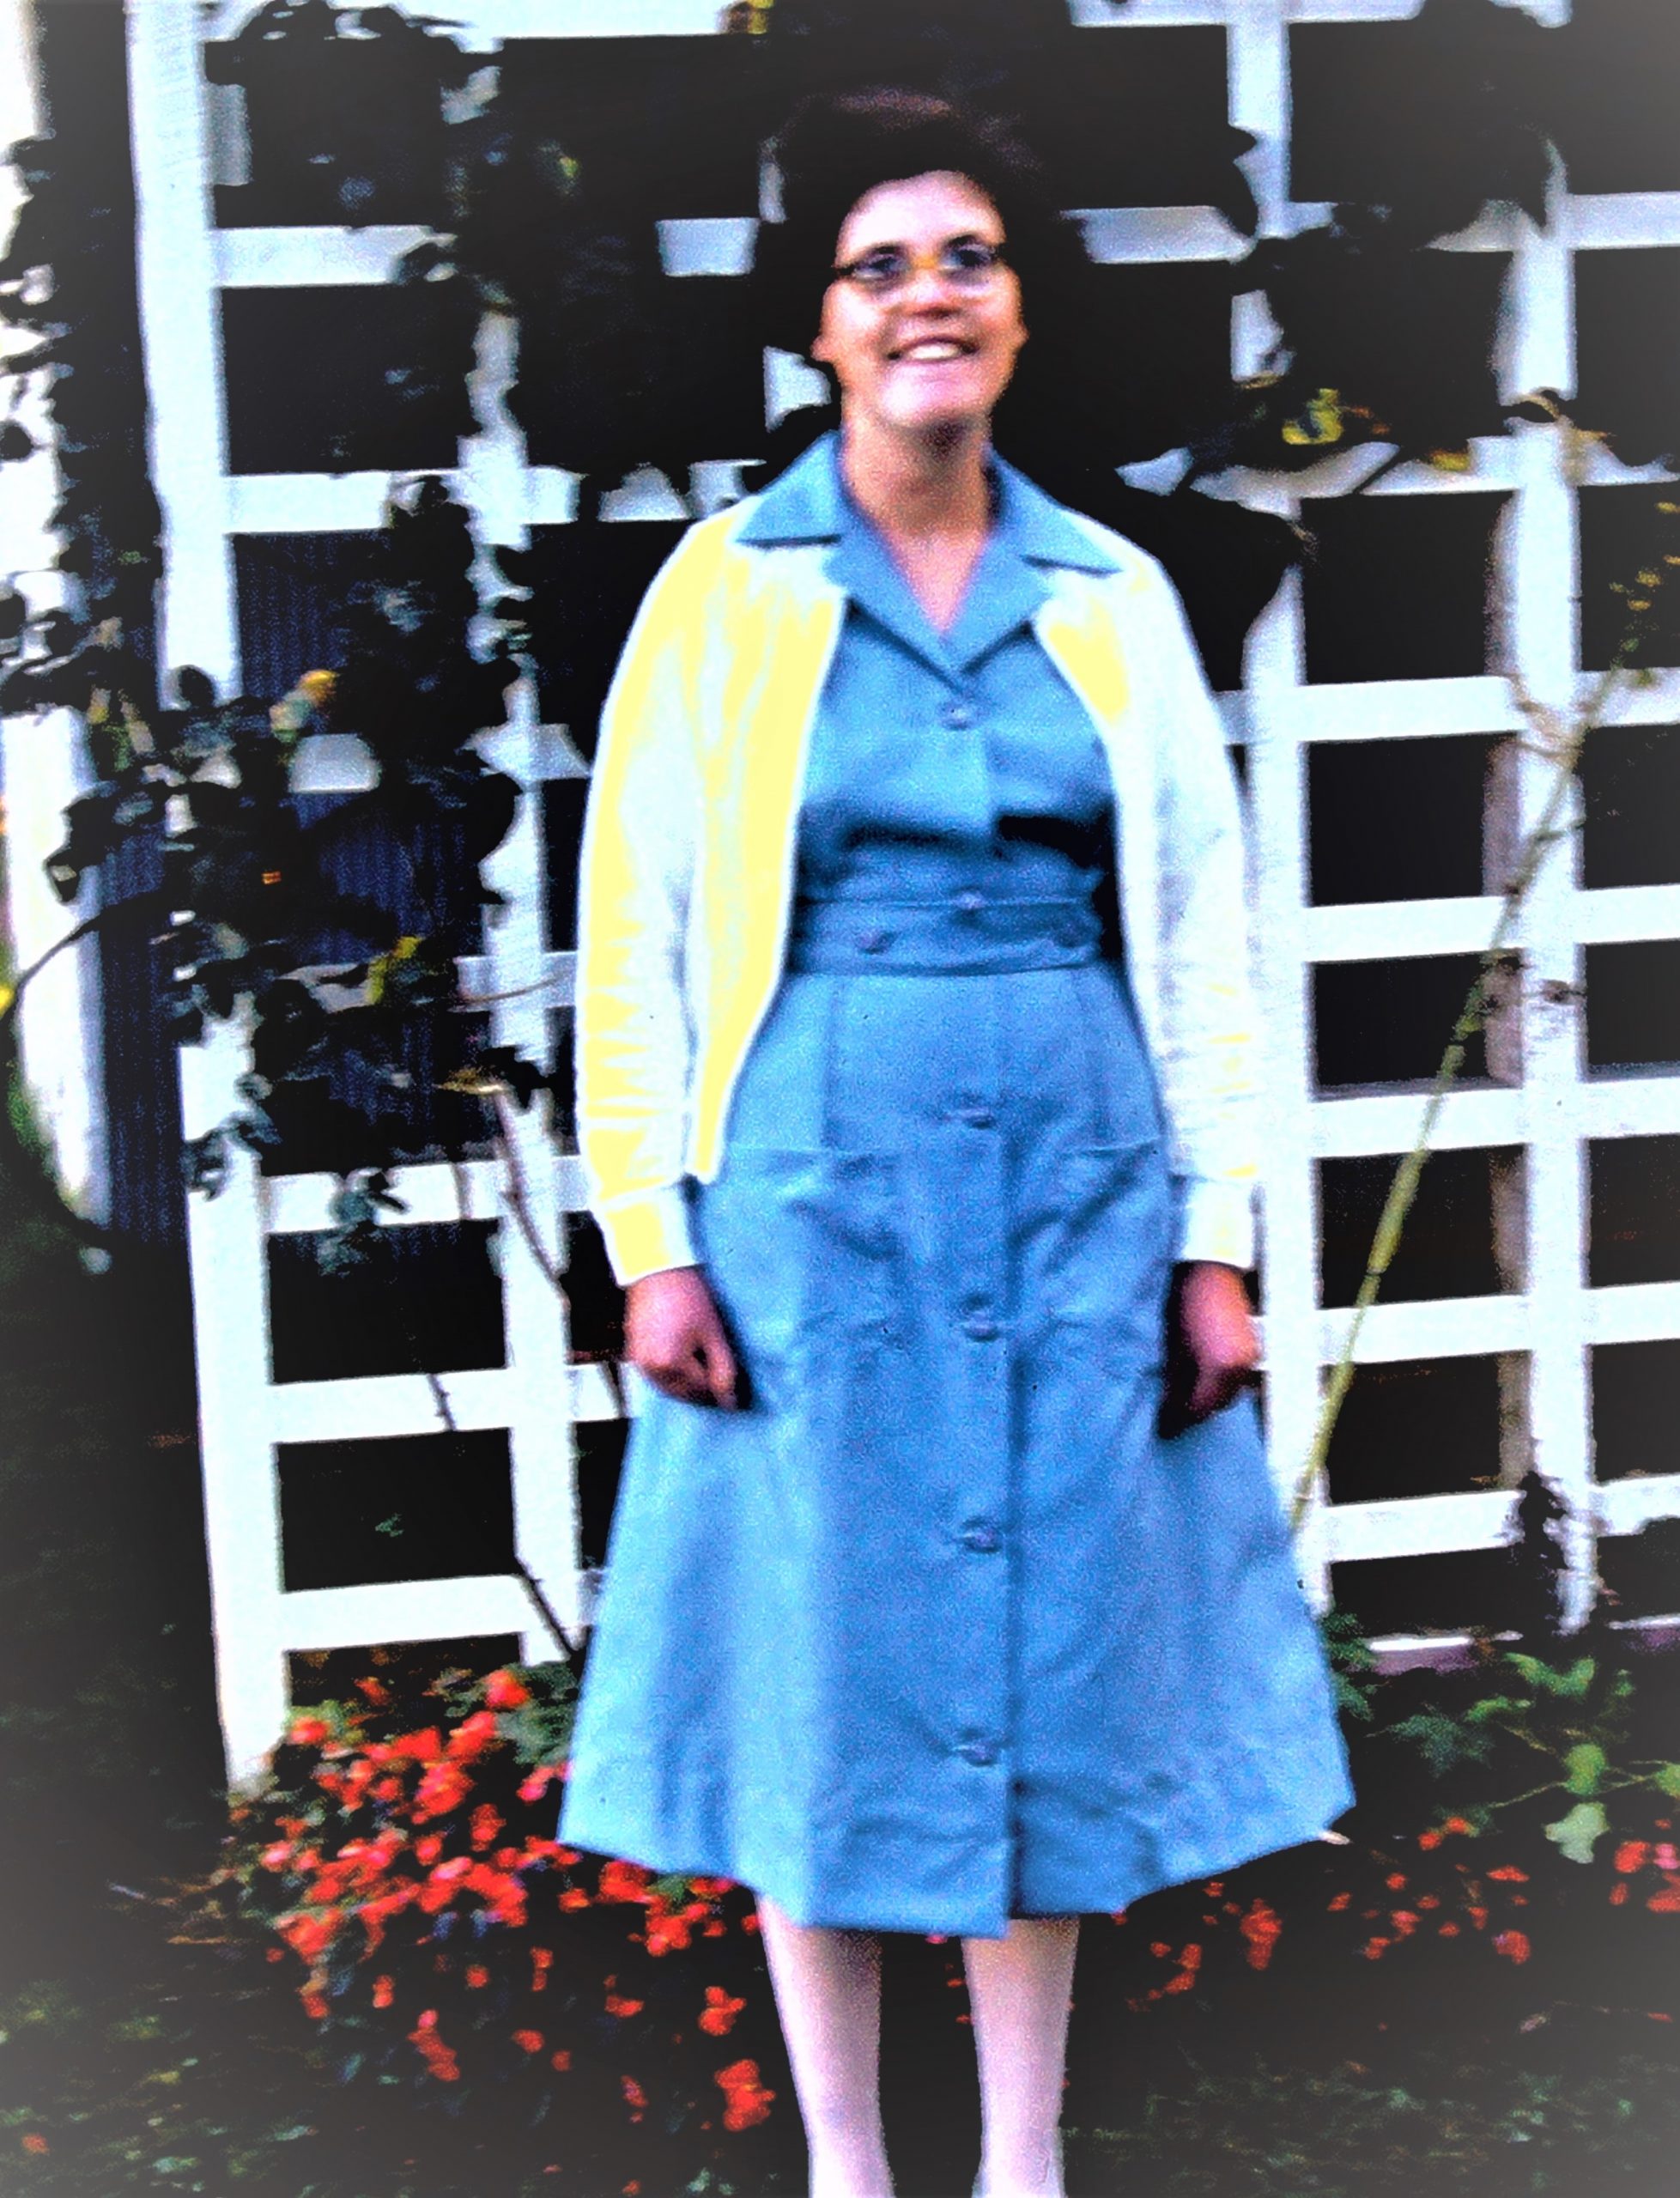 Lesley, smiling, stands in front of a garden trellis. She wears a blue uniform dress with white cardigan